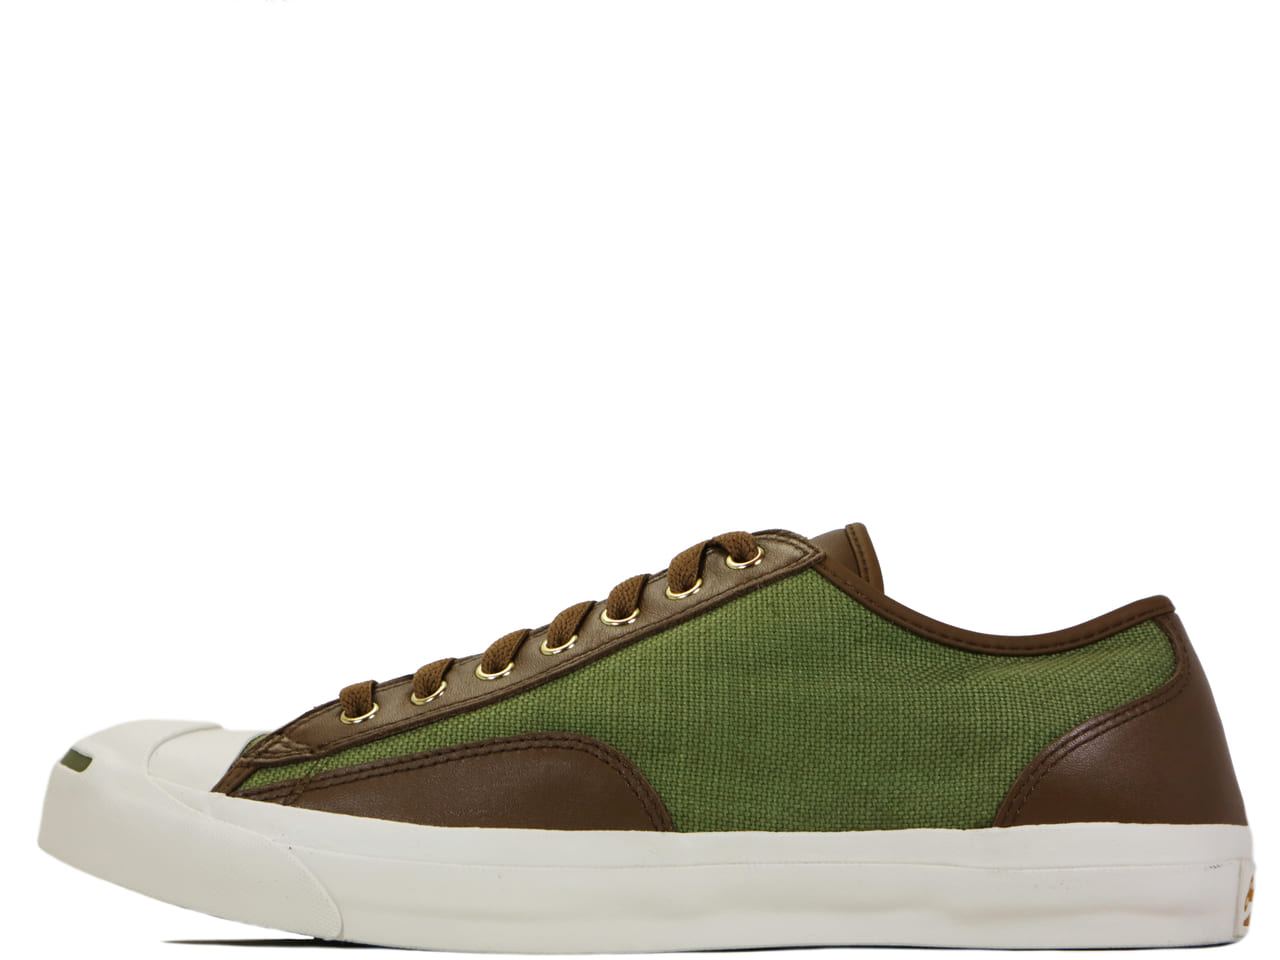 JACK PURCELL WORK 100TH